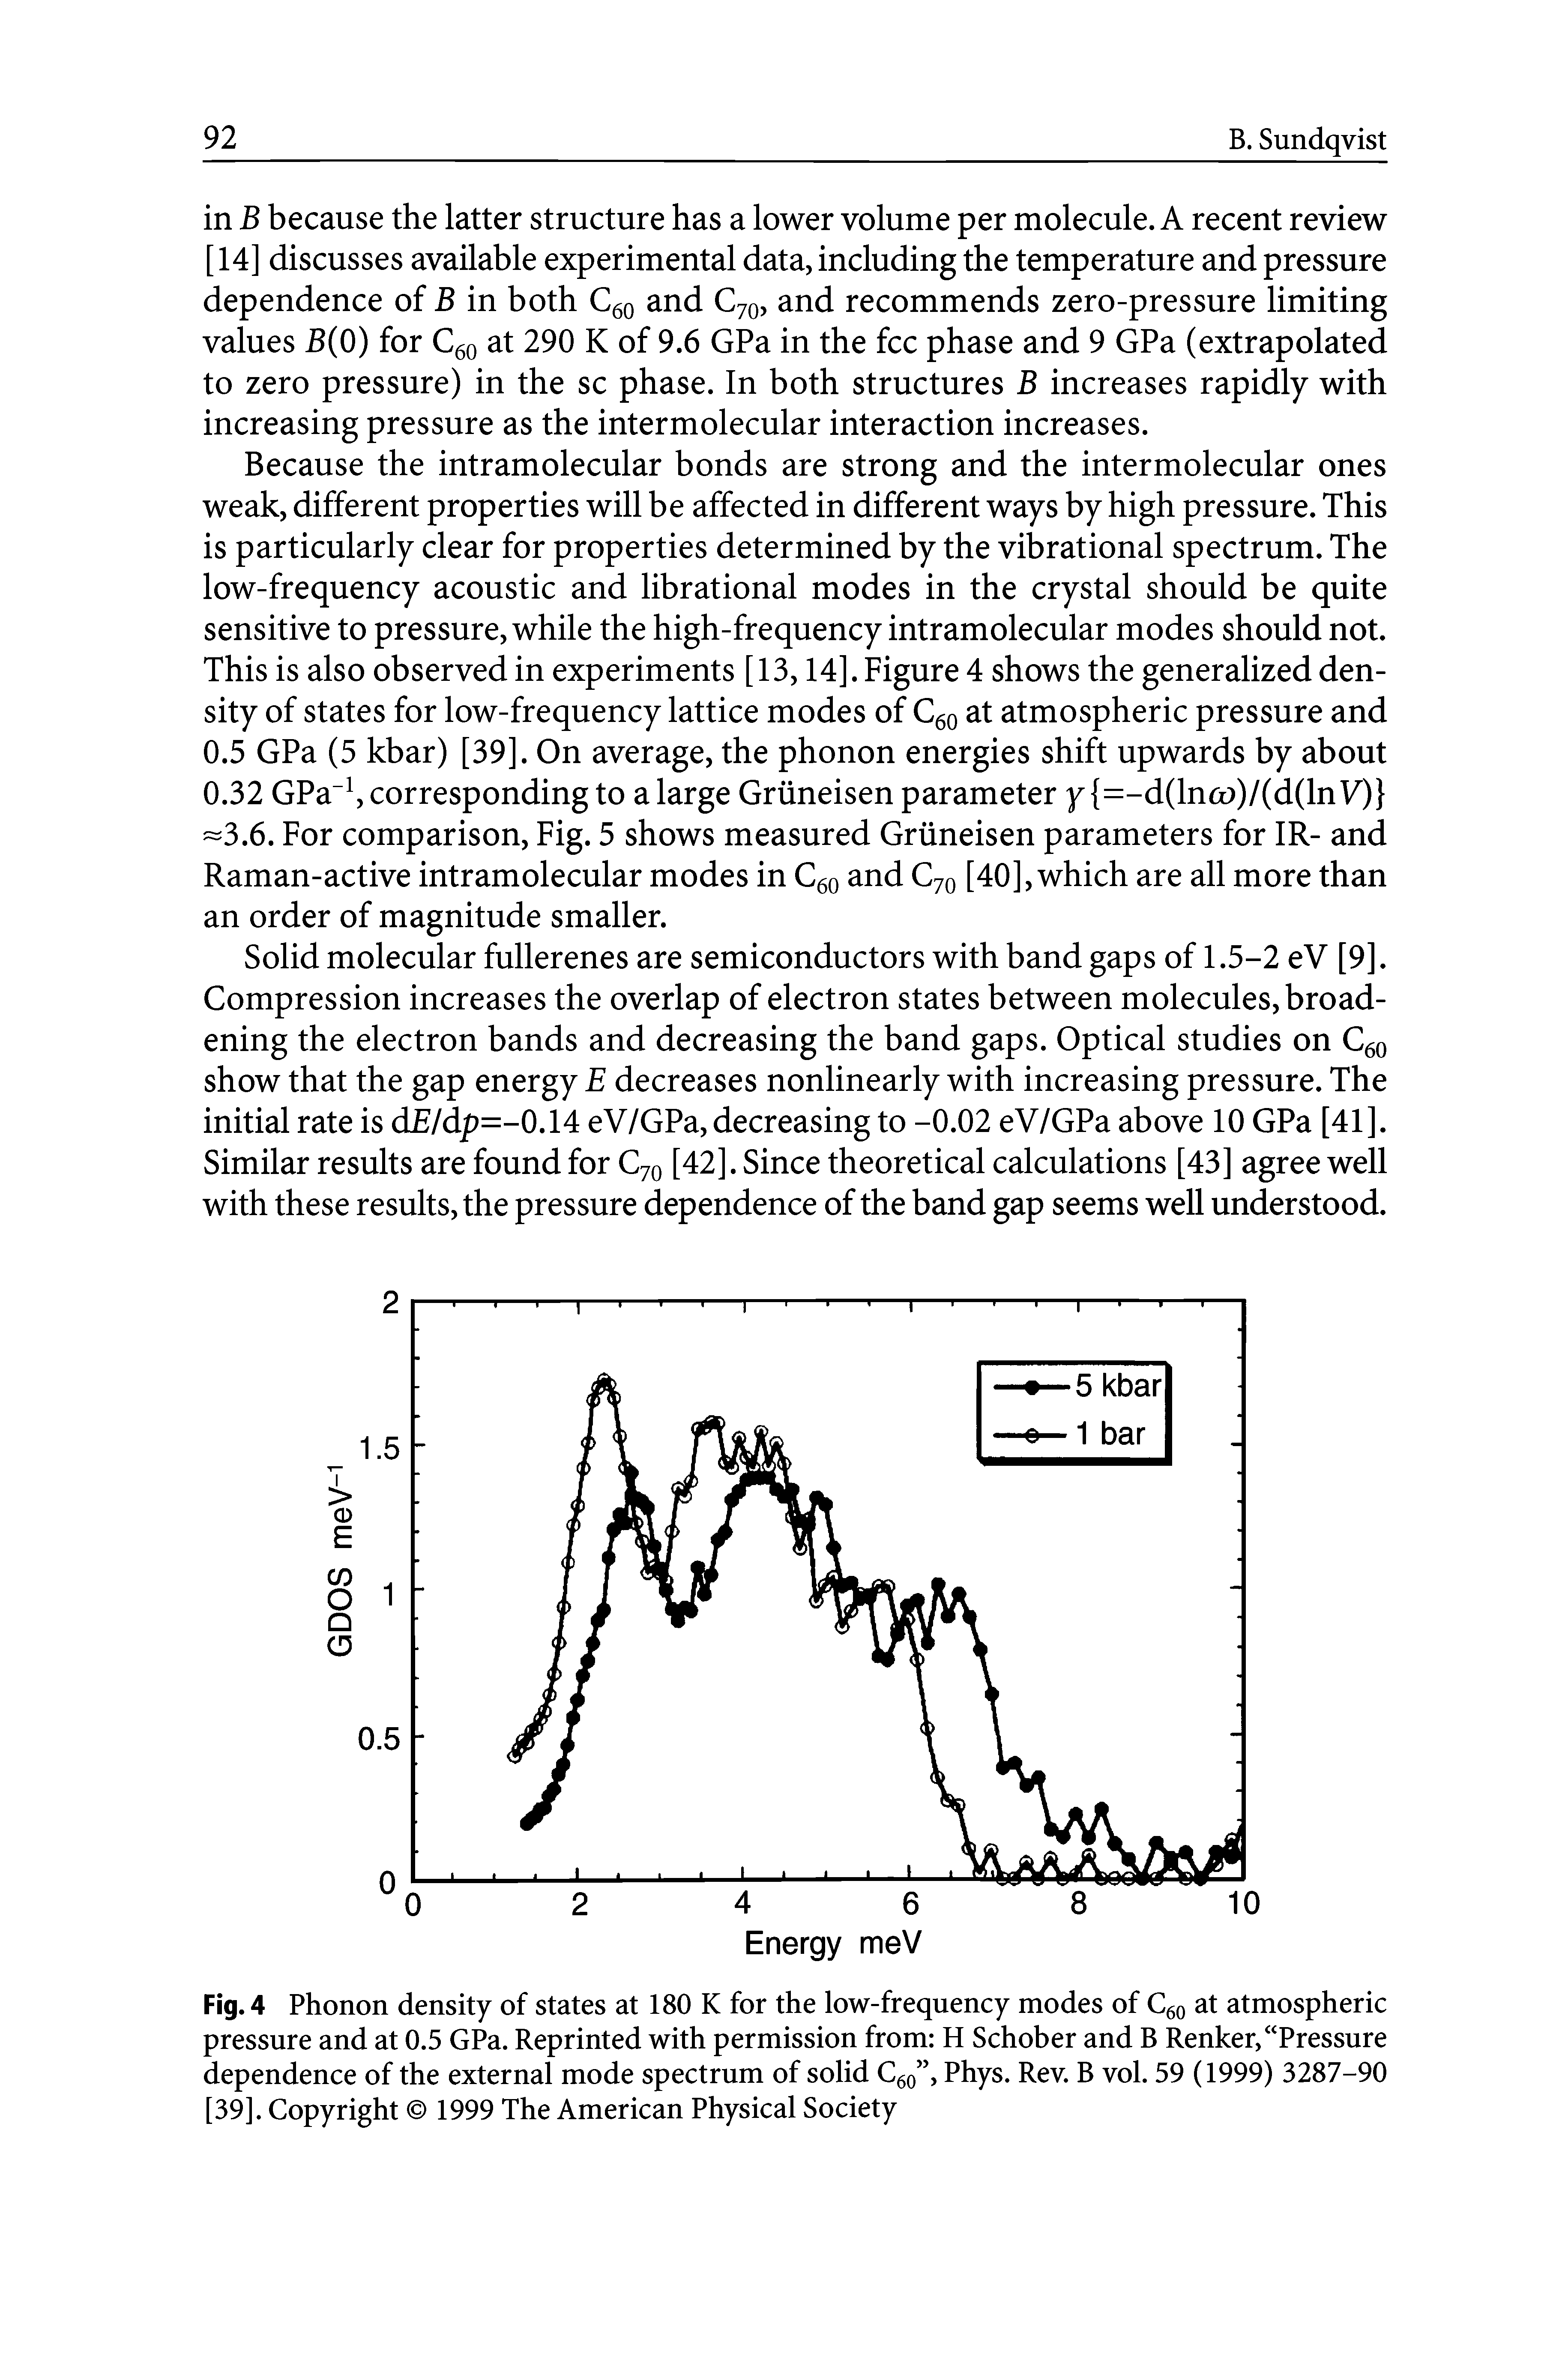 Fig. 4 Phonon density of states at 180 K for the low-frequency modes of C60 at atmospheric pressure and at 0.5 GPa. Reprinted with permission from H Schober and B Renker, Pressure dependence of the external mode spectrum of solid C60 , Phys. Rev. B vol. 59 (1999) 3287-90 [39]. Copyright 1999 The American Physical Society...